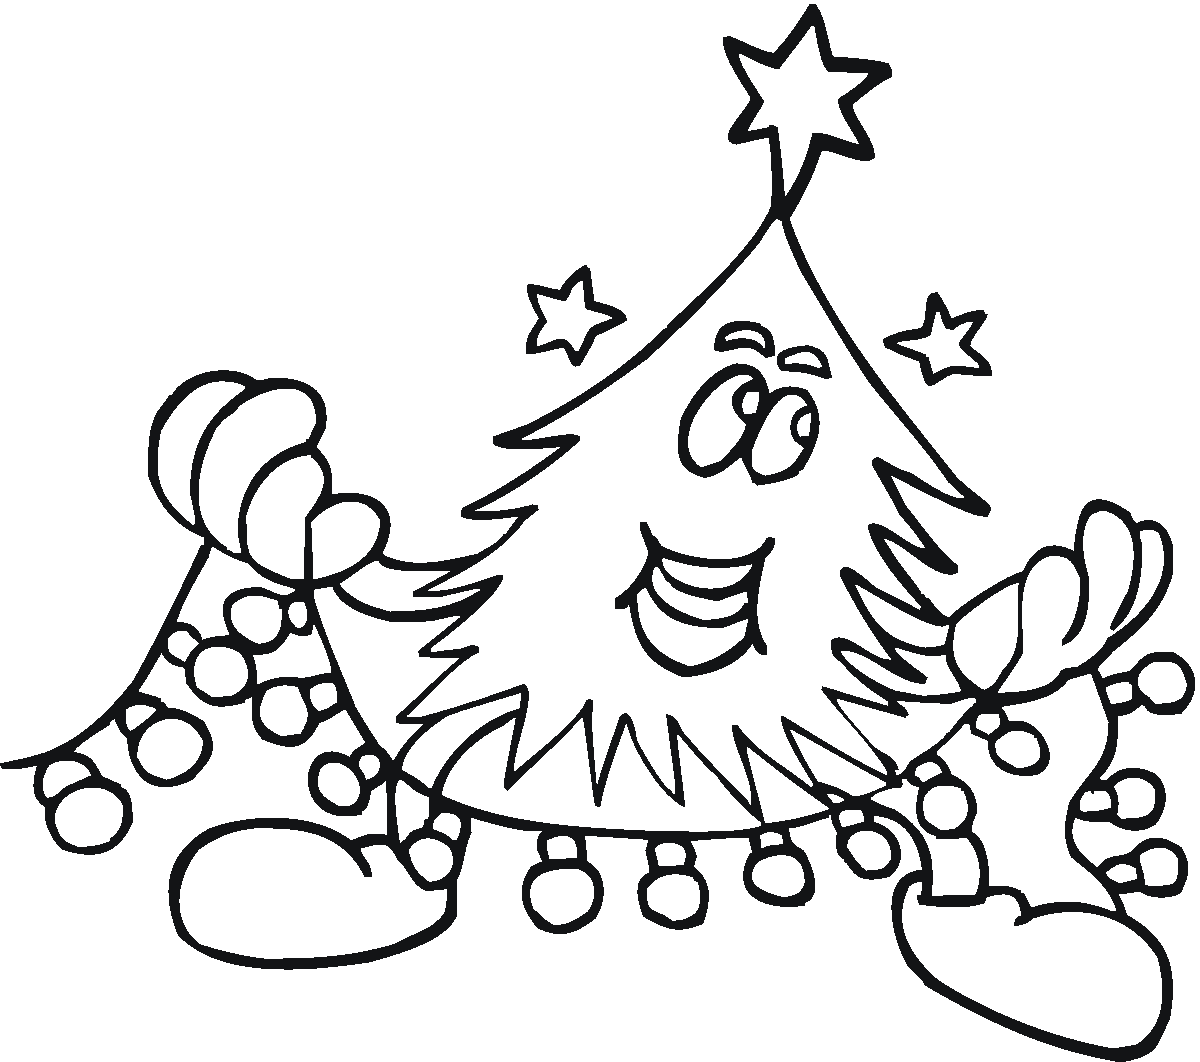 christmas tree pictures coloring pages jarvis varnado 15 christmas tree coloring pages for kids pictures tree coloring pages christmas 